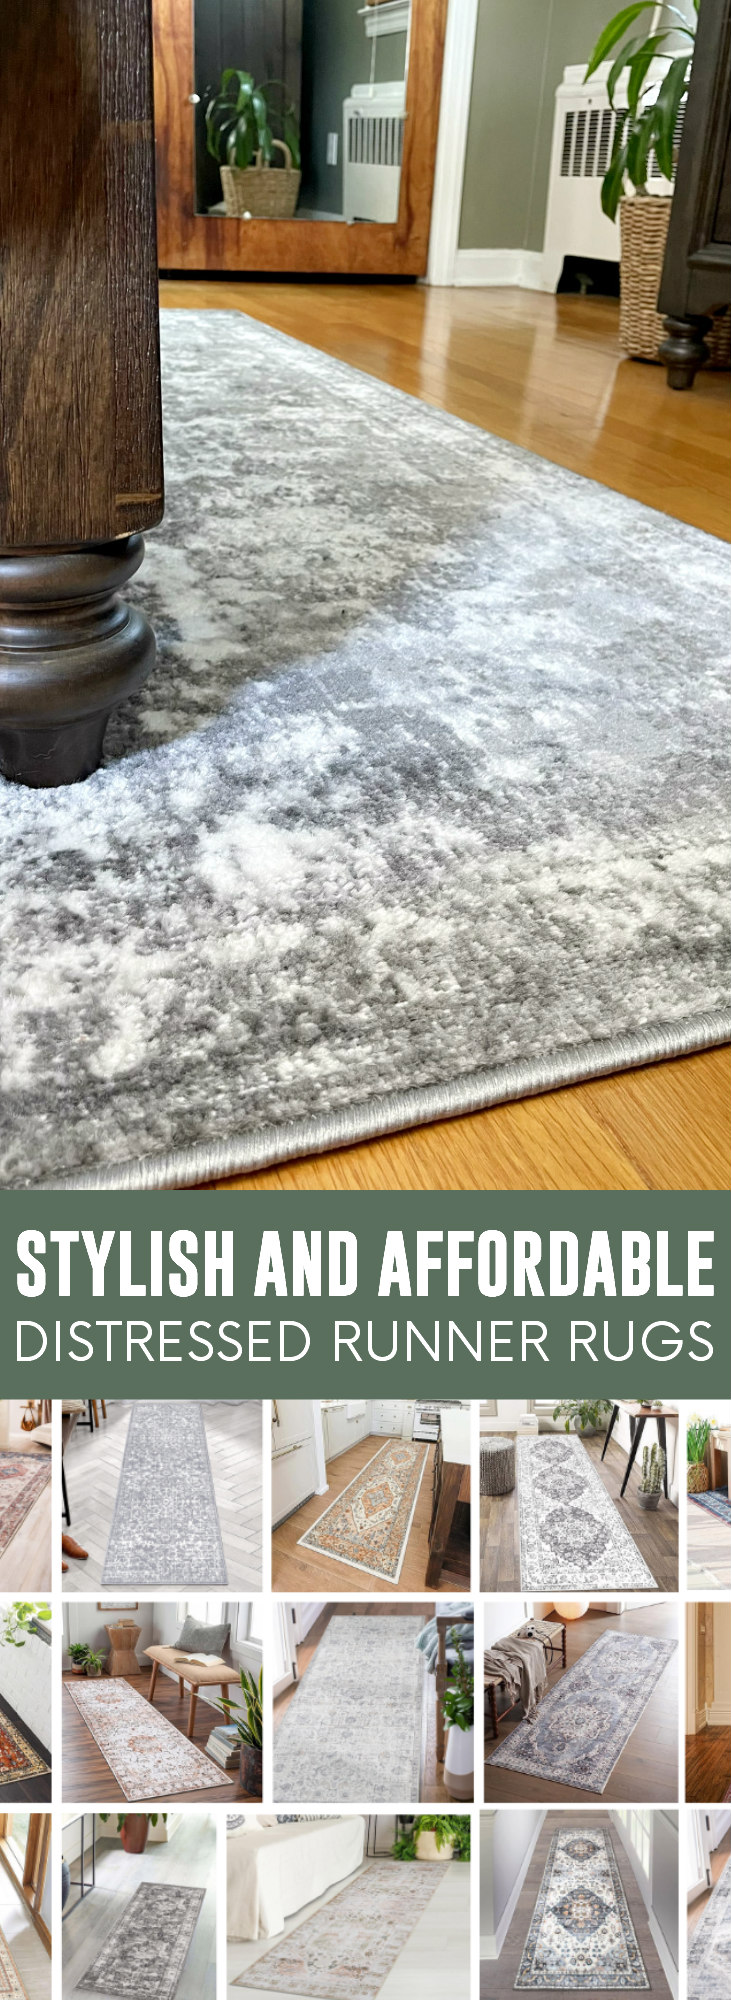 Stylish and Affordable Distressed Runner Rugs pinnable image.